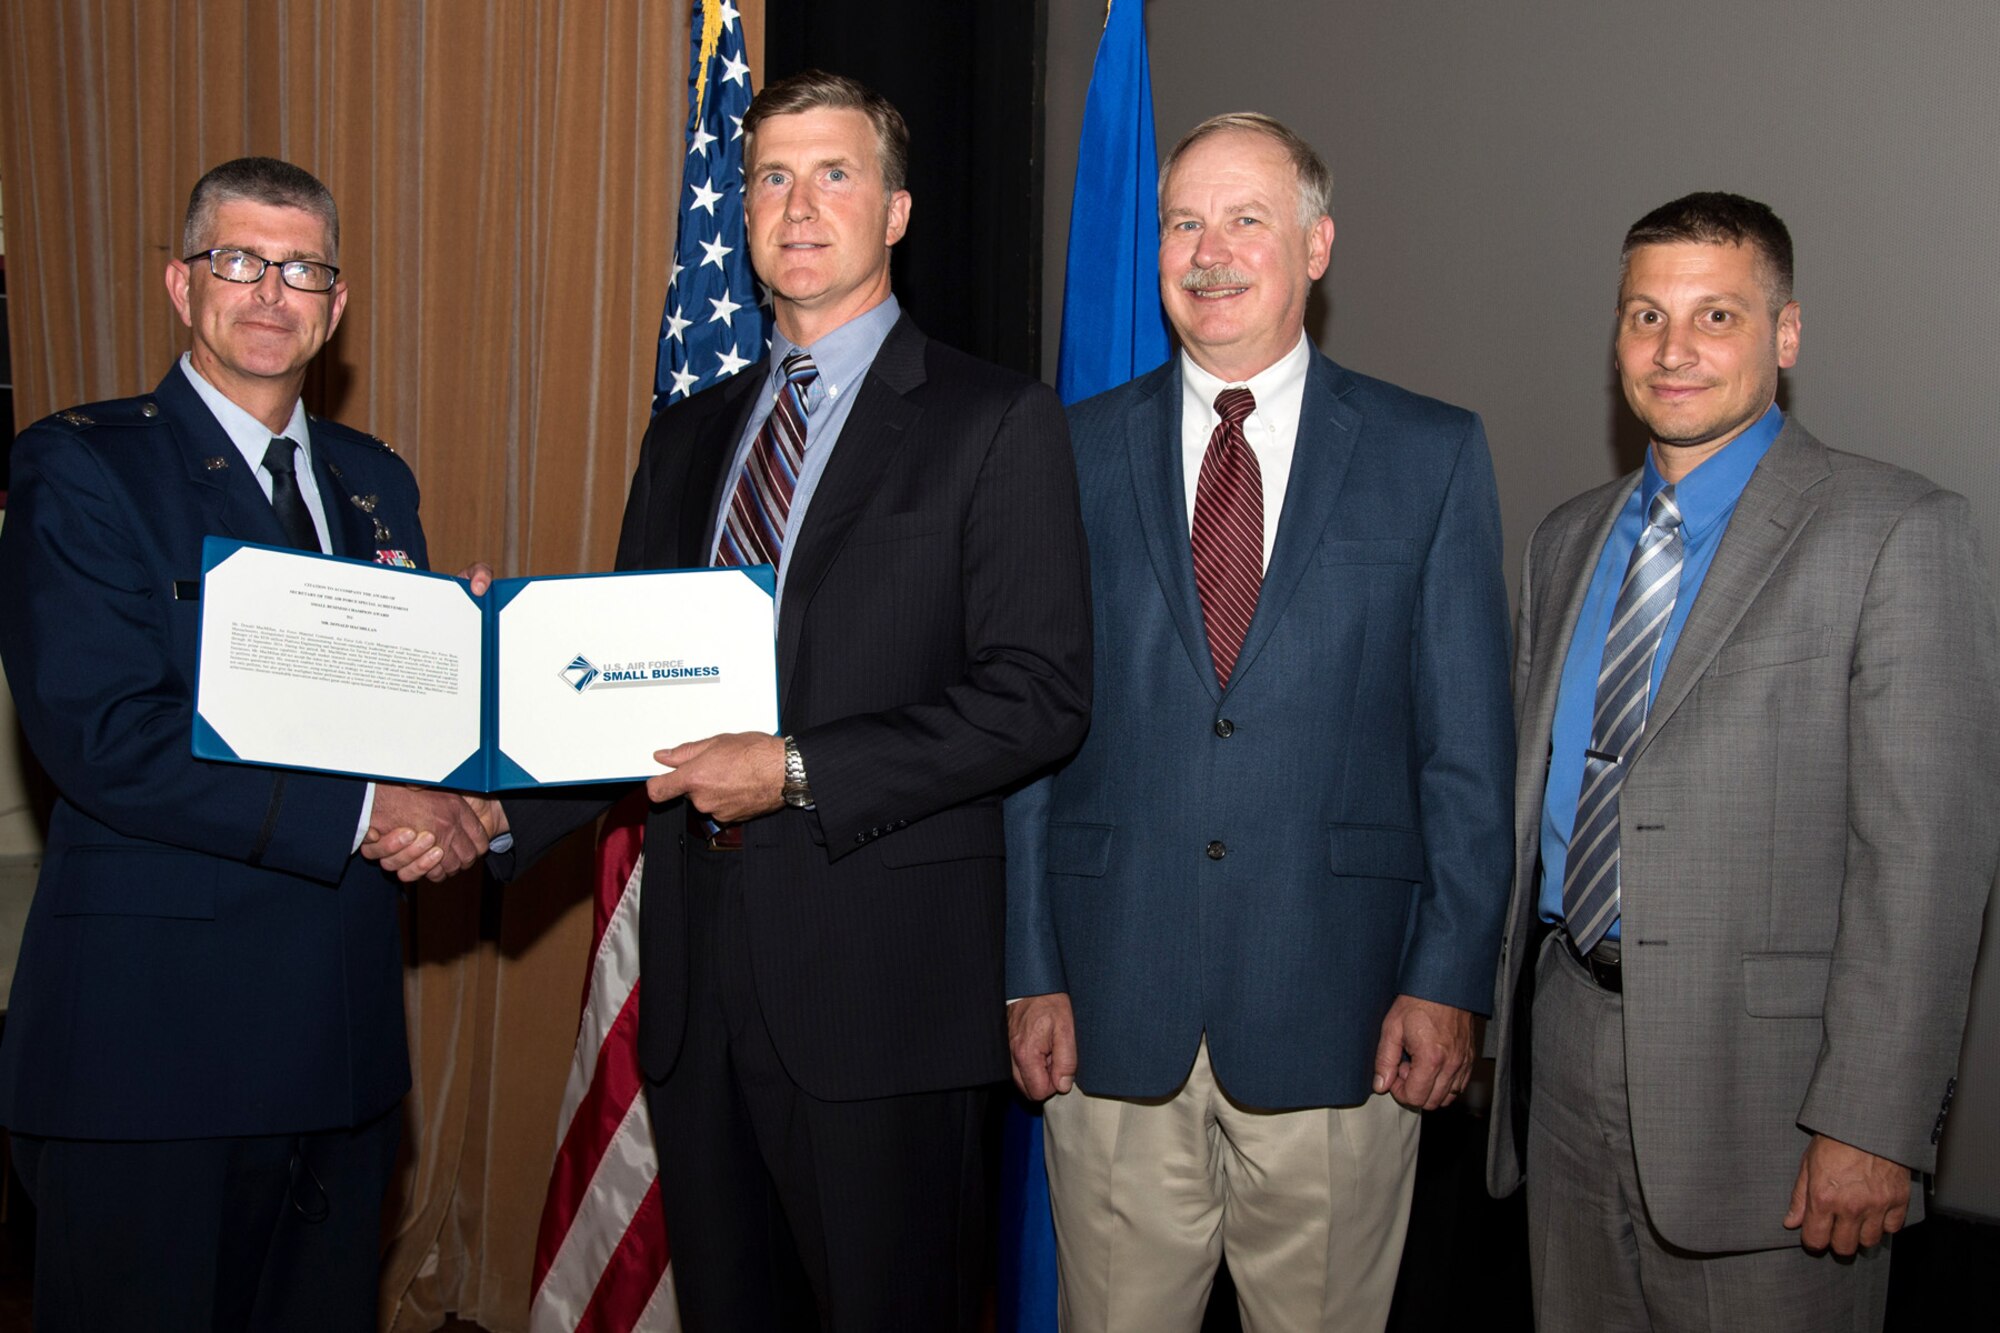 U.S. Air Force Col. Scott Owens, Theater Battle Control Division senior materiel leader, presents Don MacMillan, PEITSS program manager, with an Air Force-level Small Business Programs award during a division meeting at Hanscom Air Force Base, Mass., June 24, 2015. MacMillan's unique approach and extensive market research resulted in good news for small business contractors vying for the PEITSS contract -- a contract previously deemed large business worthy. Also on stage is Bill Donaldson, Hanscom Small Business director, and Rob Bubello (far right), MacMillan's supervisor. (U.S. Air Force photo by Mark Herlihy)  